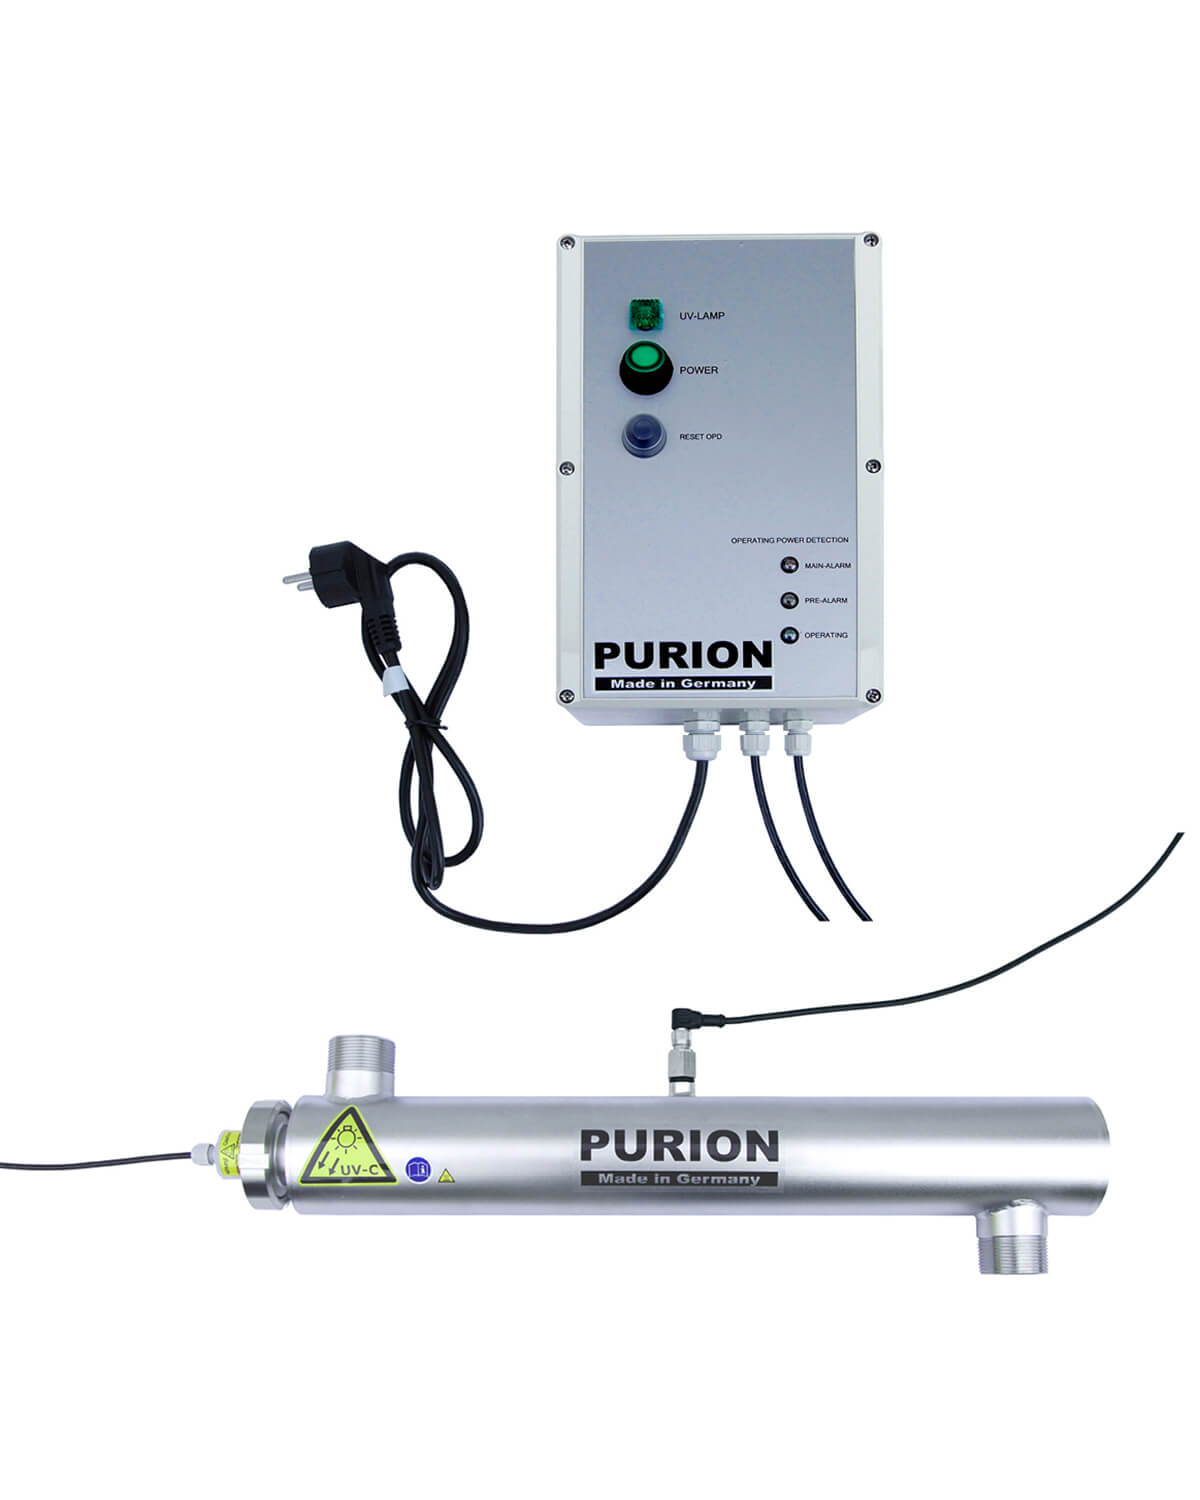 PURION Pool 20 Stainless Steel Plus – UV Concept GmbH